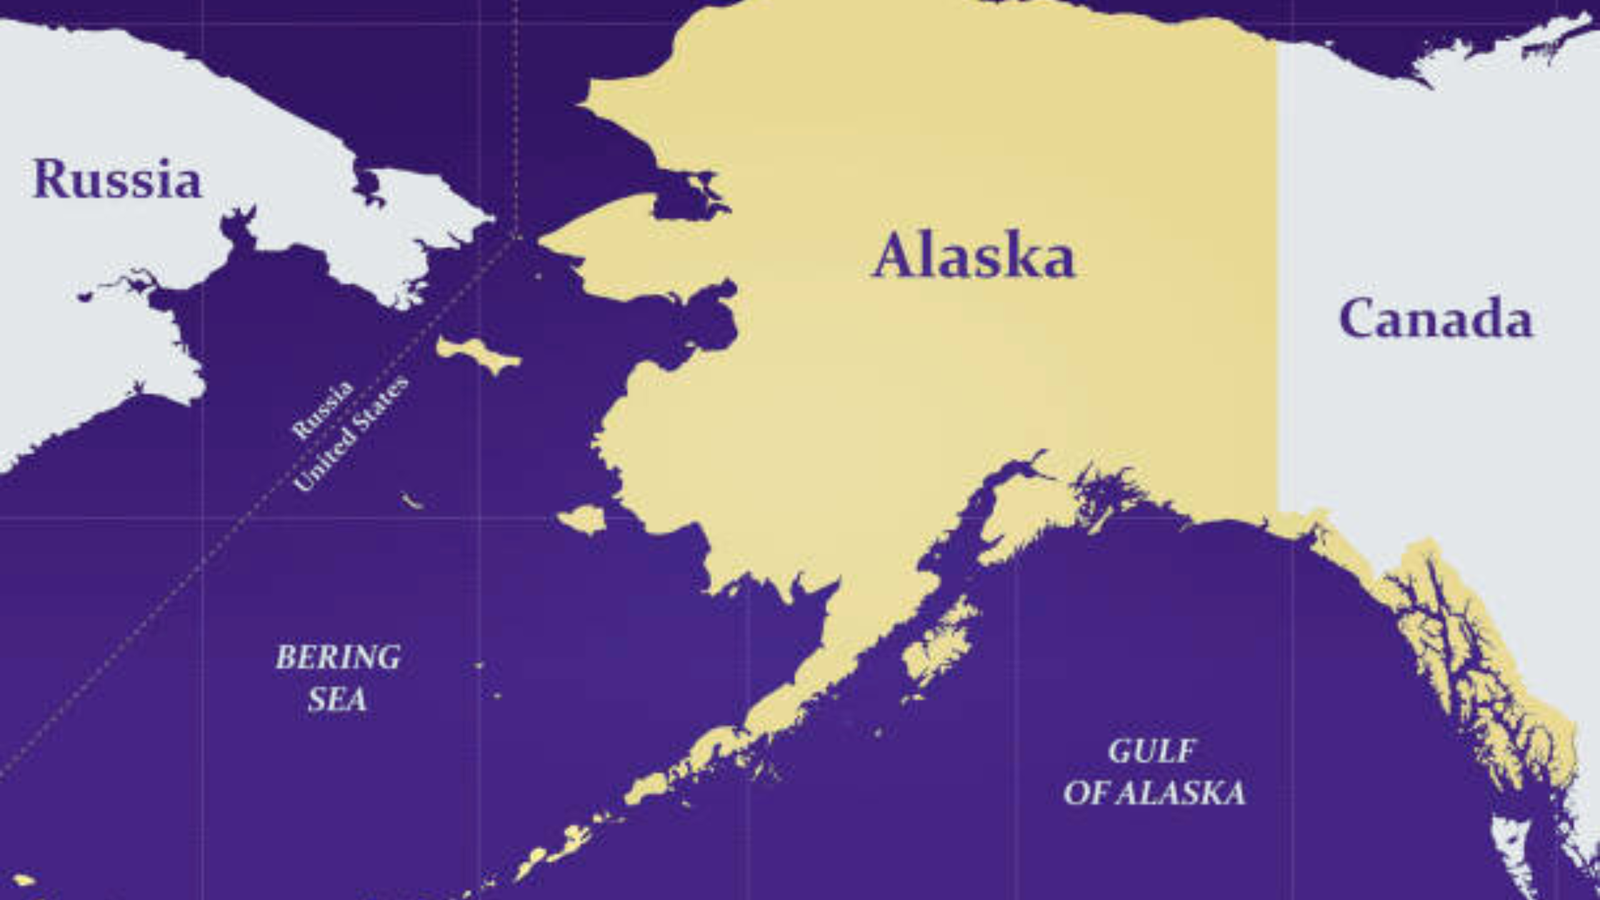 How far is Alaska from Russia